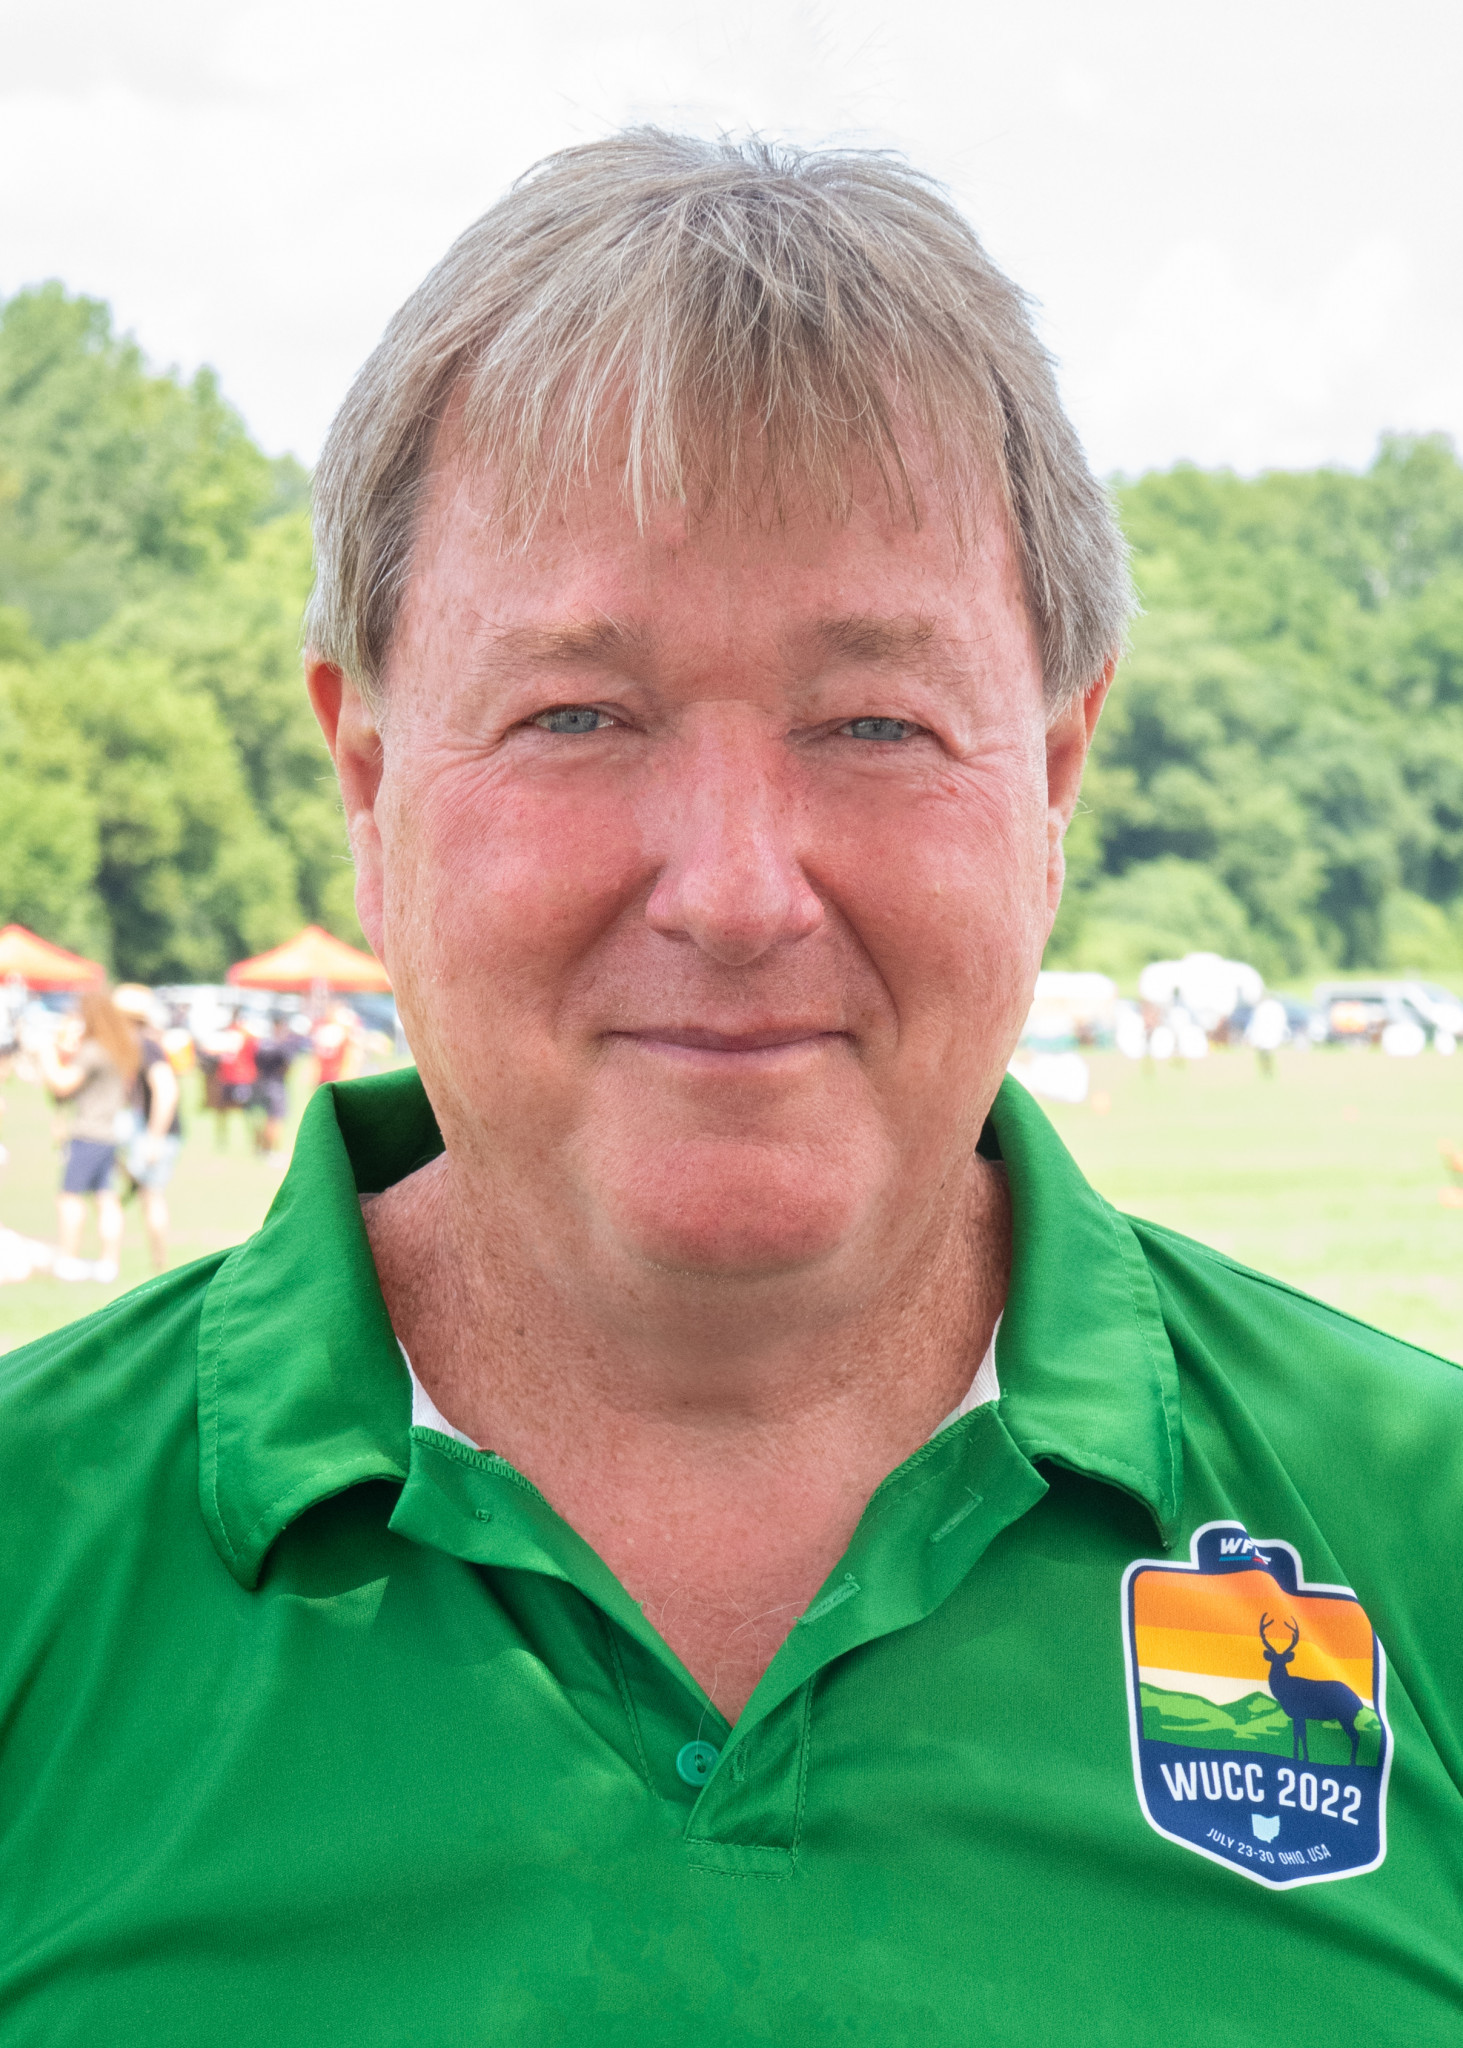 Dale Wilker has been the event director of the Organising Committee for the 2018 and 2022 editions of the WFDF World Ultimate Club Championships ©Bob Scheadler